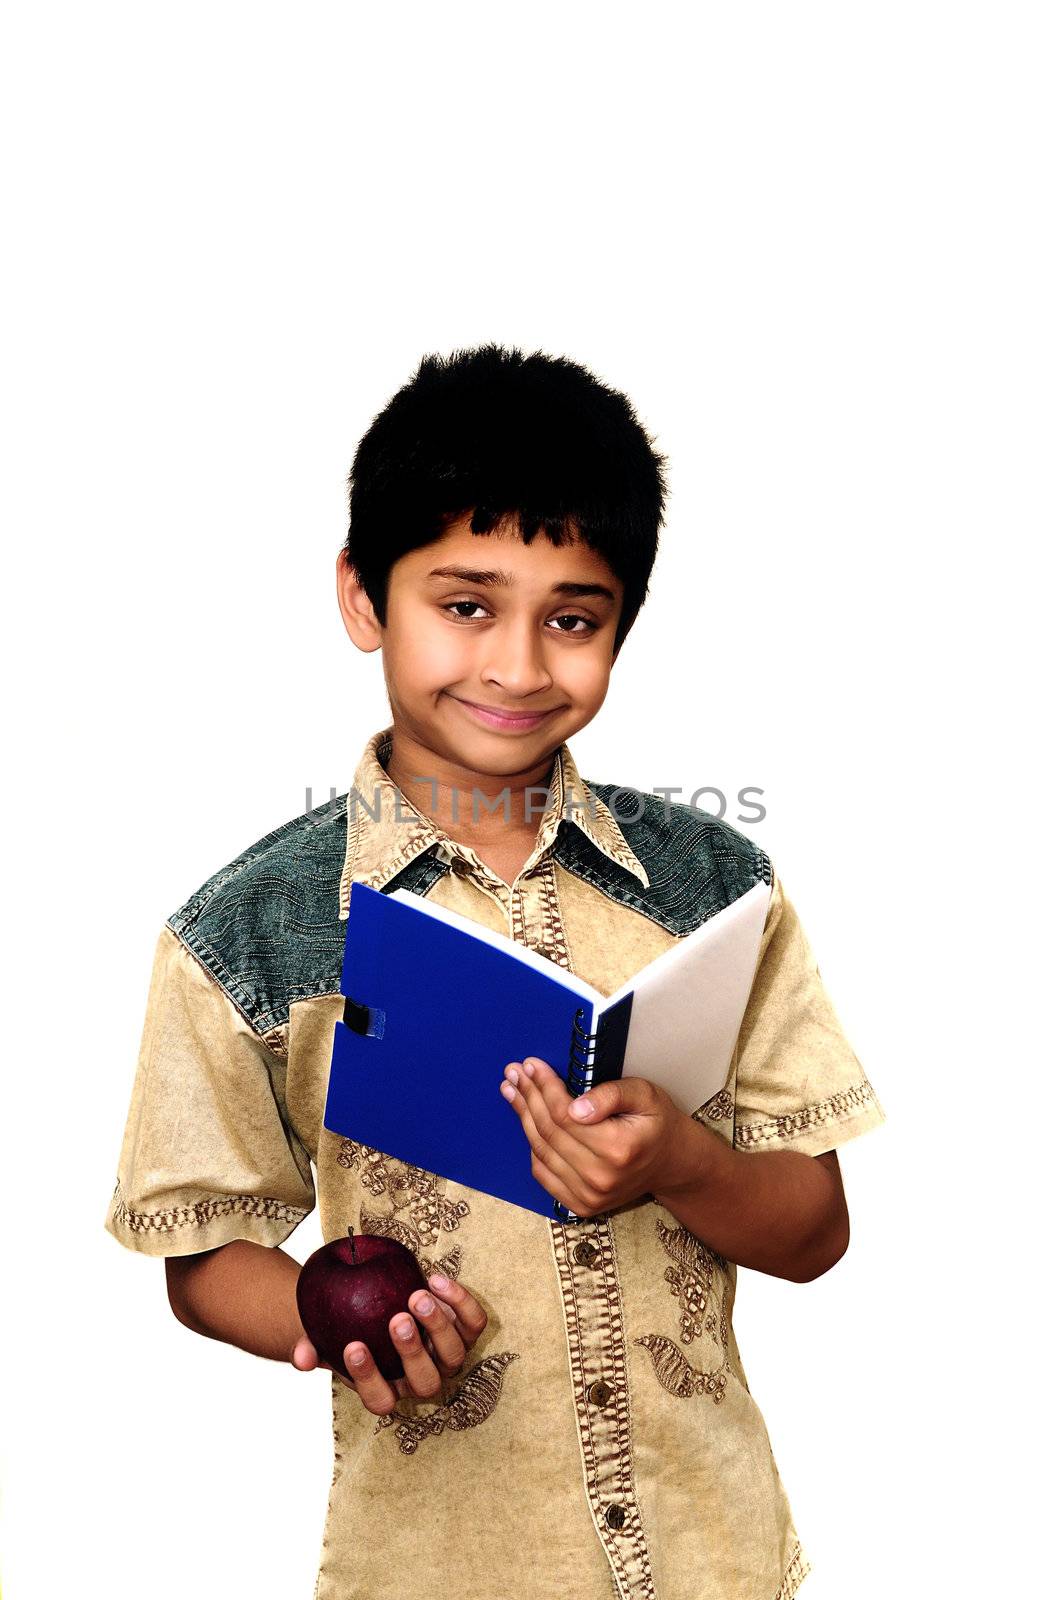 An handsome Indian kid holding apples with a smile